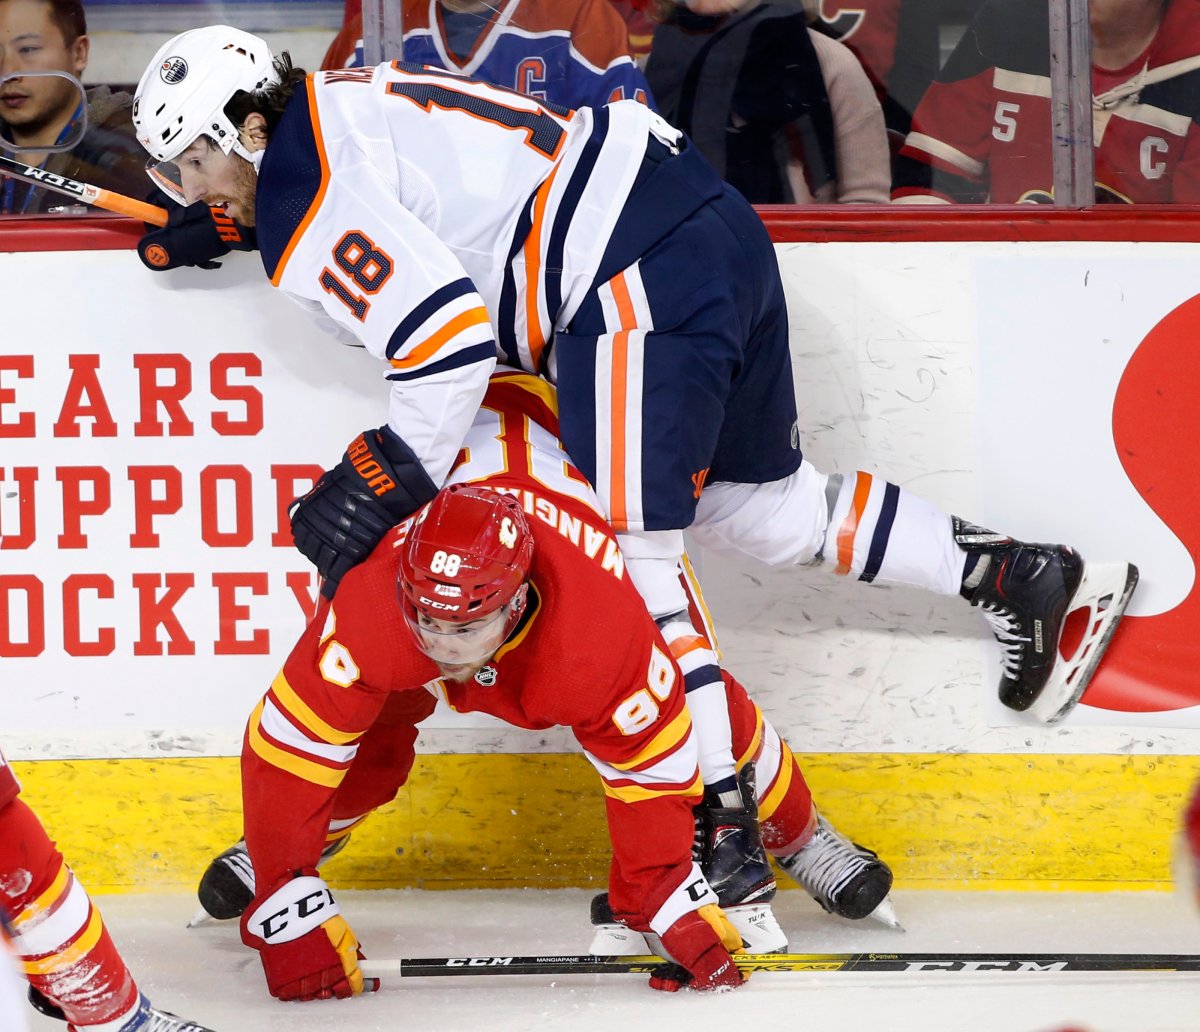 Edmonton Oilers' James Neal, top, knocks down Calgary Flames' Andrew Mangiapane during first period NHL hockey action in Calgary, Alta., Saturday, Jan. 11, 2020. THE CANADIAN PRESS/Larry MacDougal.